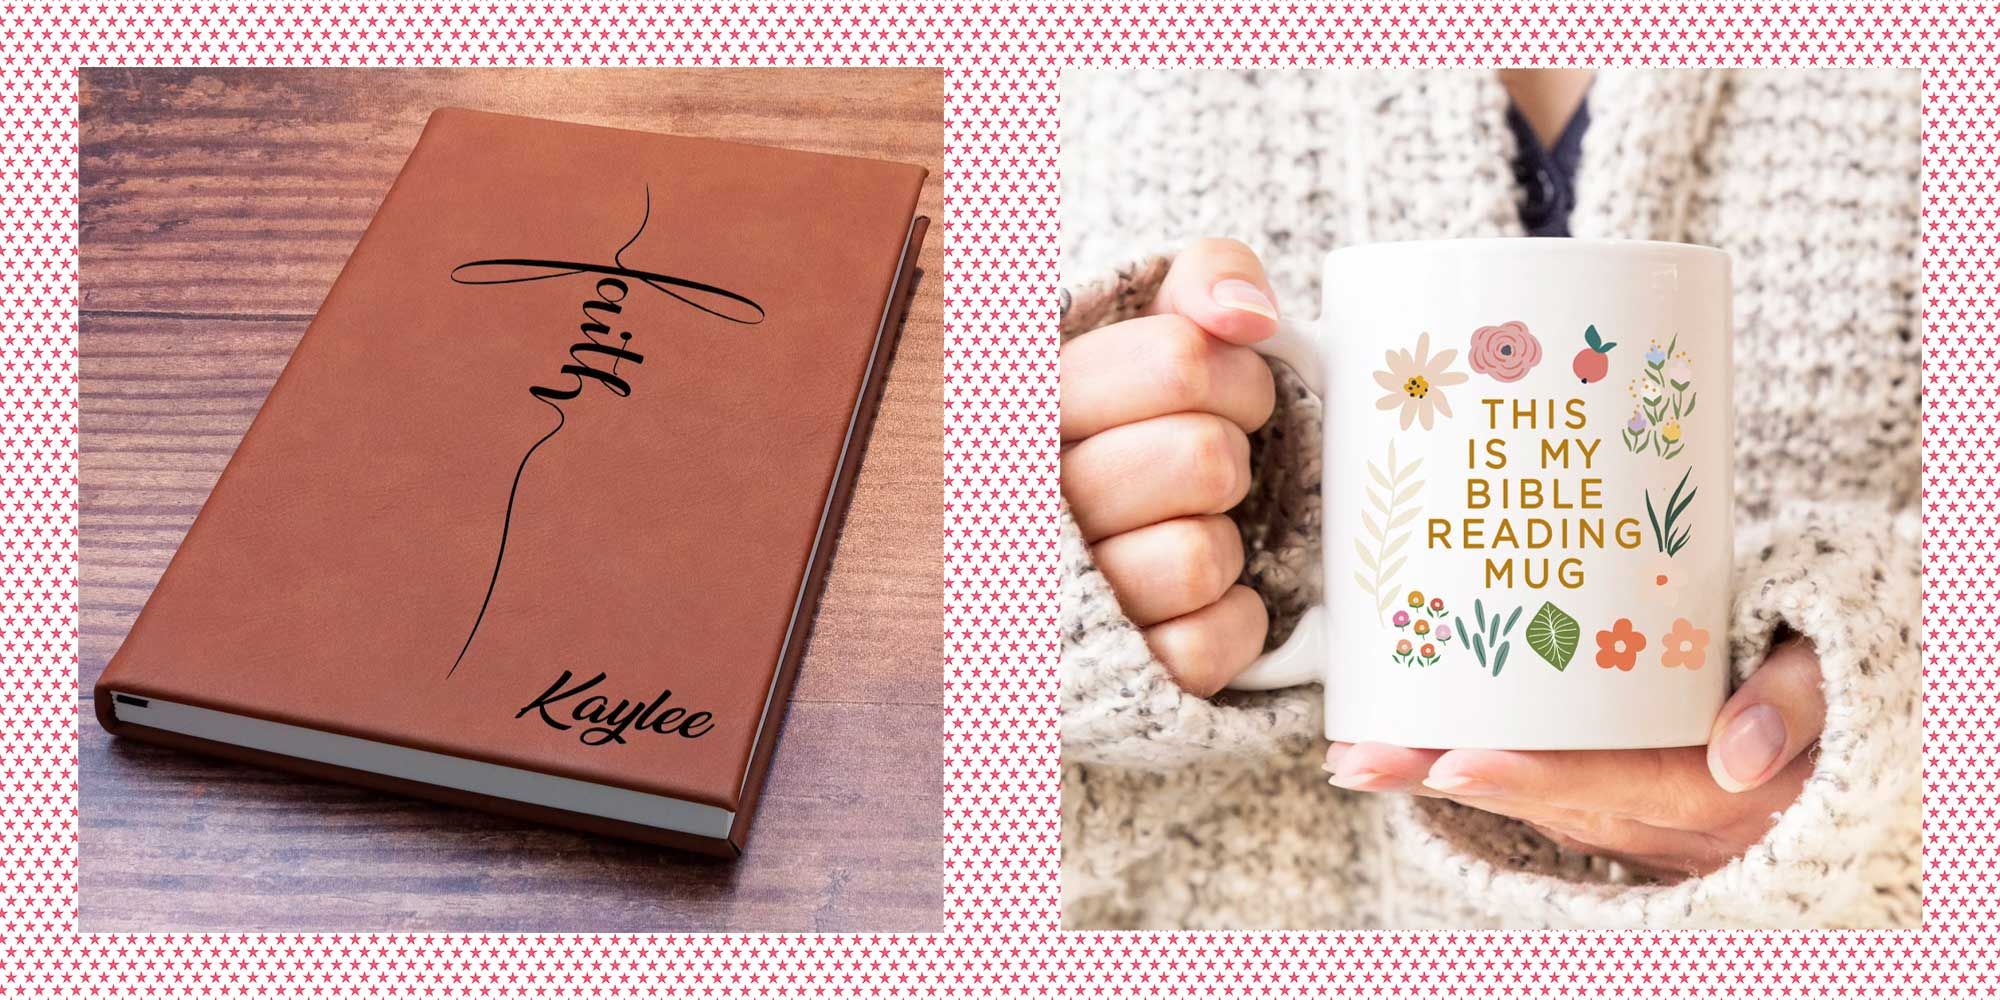 36 Brilliant Gifts For Graduate Students That Should Have A PhD In  Practical And Helpful